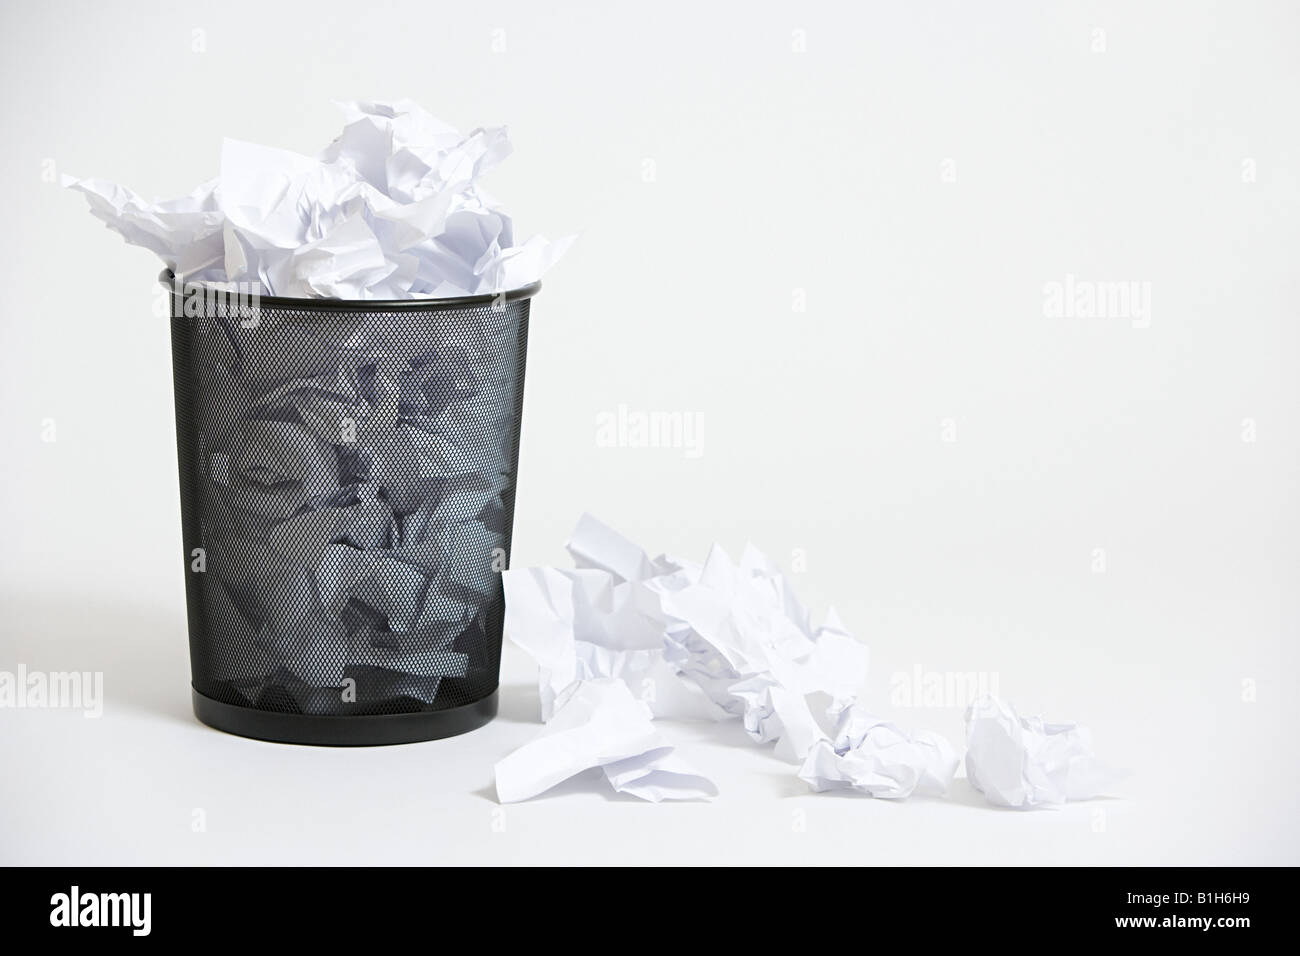 A wastepaper basket with crumpled up paper in it Stock Photo